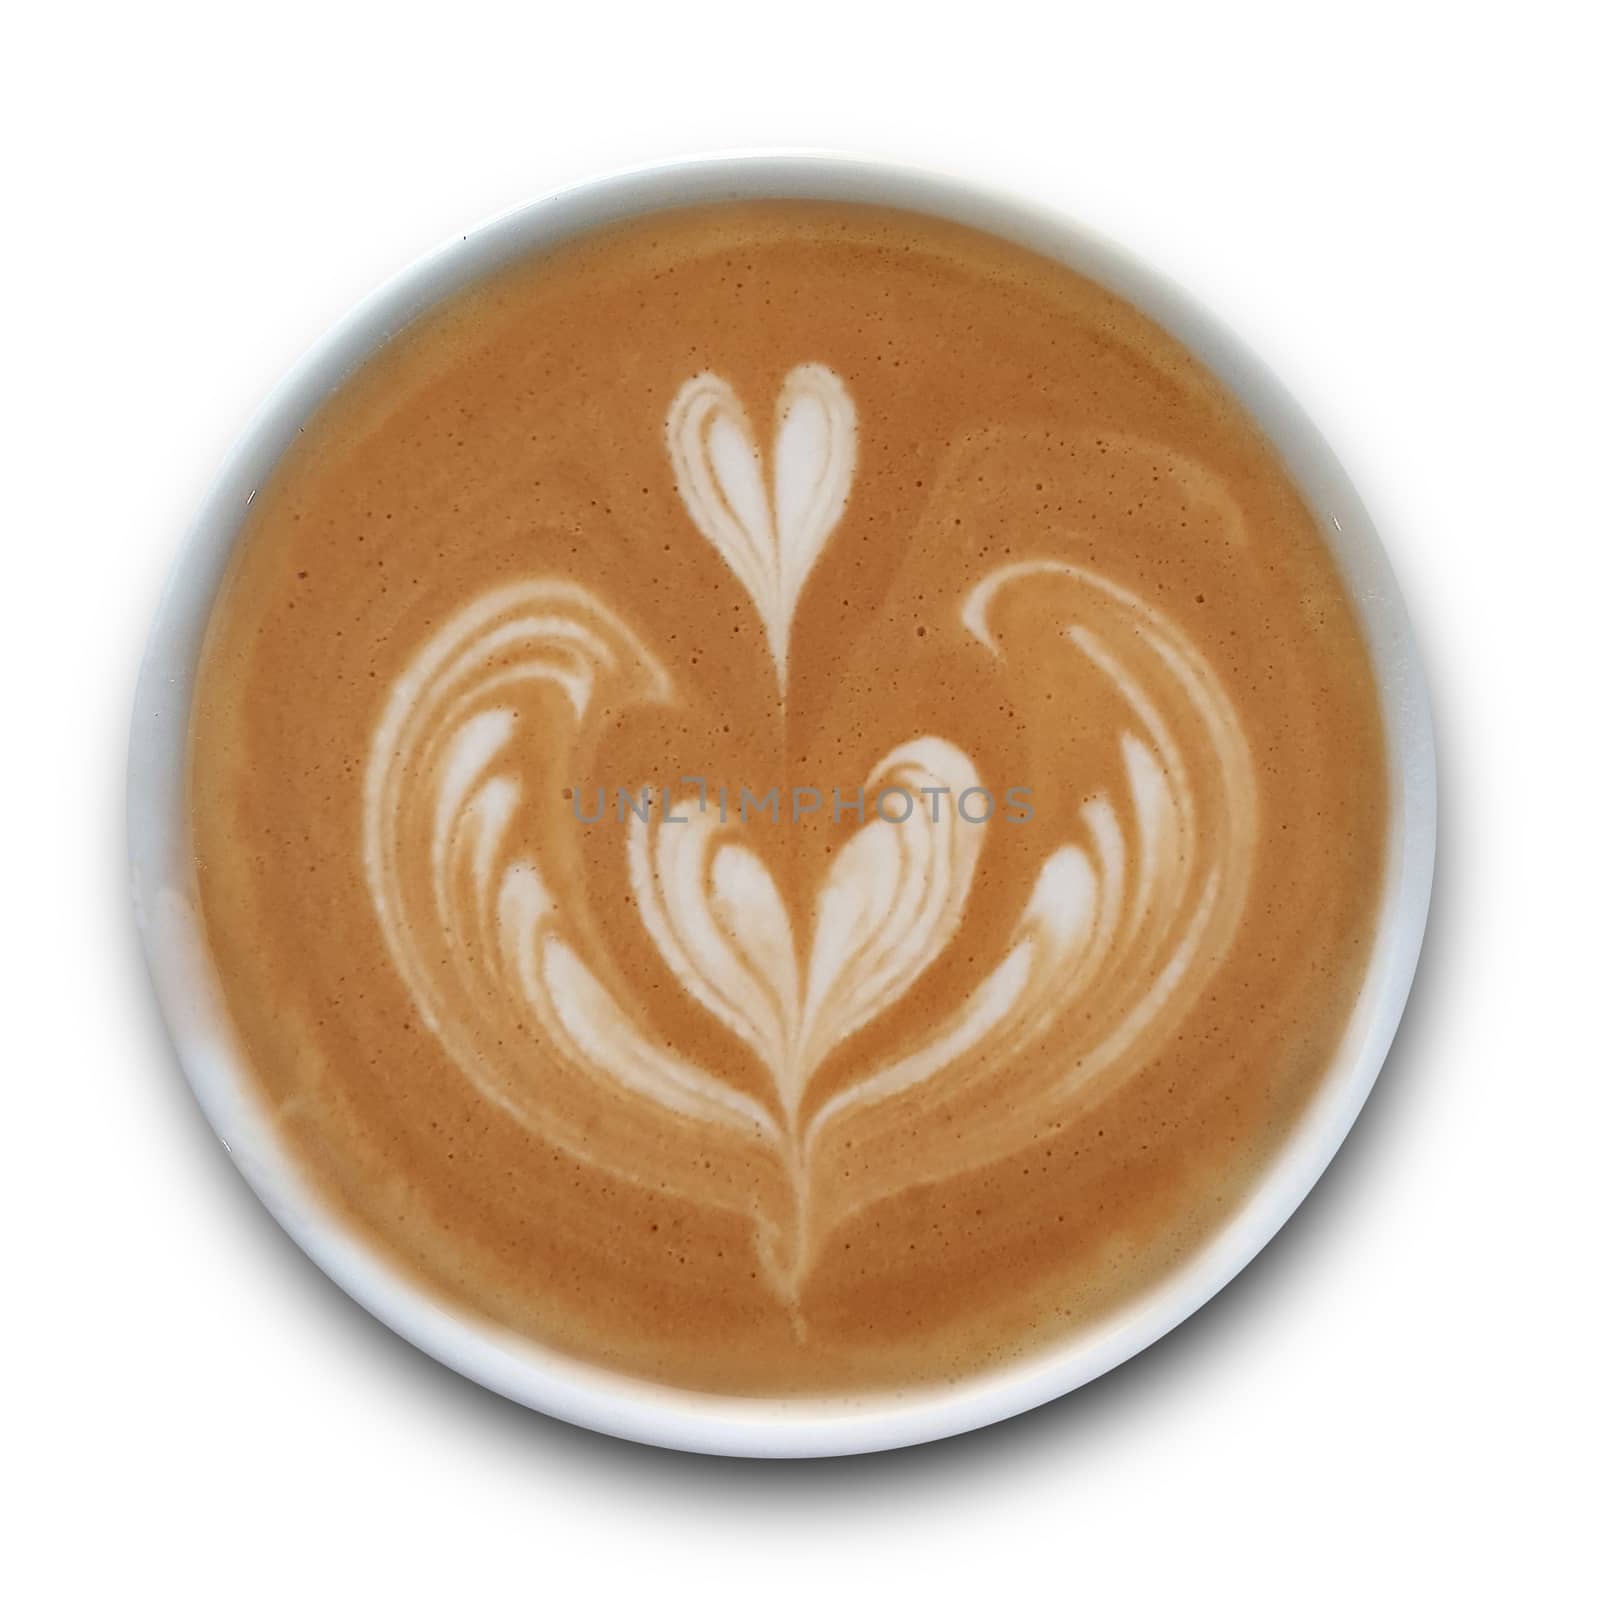 Top view of a mug of latte art coffee isolted on white background. by Tanarch